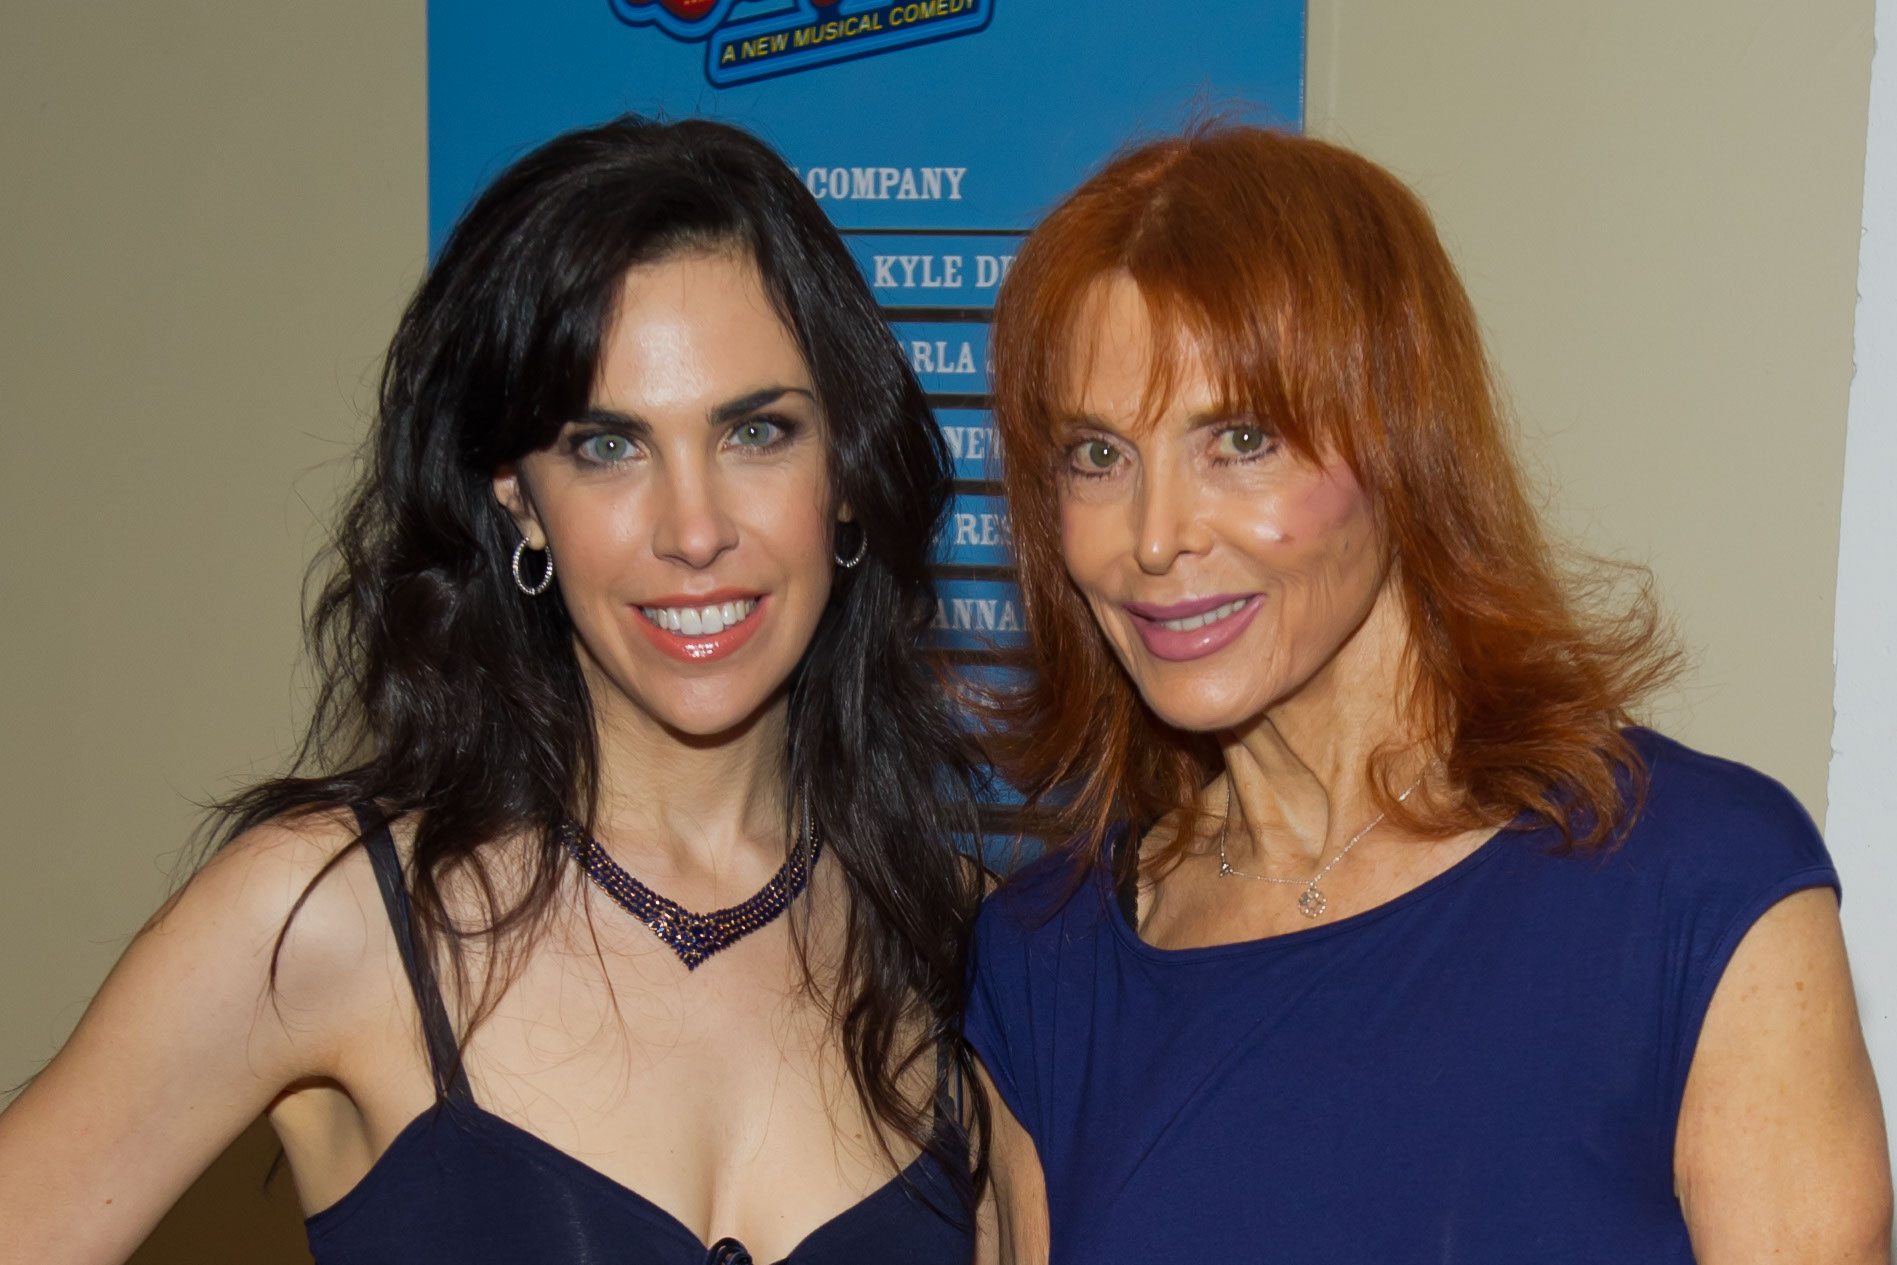 Caprice Crane and Tina Louise attend the Off-Broadway opening night of "Lucky Guy" at Little Shubert Theatre on May 19, 2011 in New York City. | Sources: Getty Images